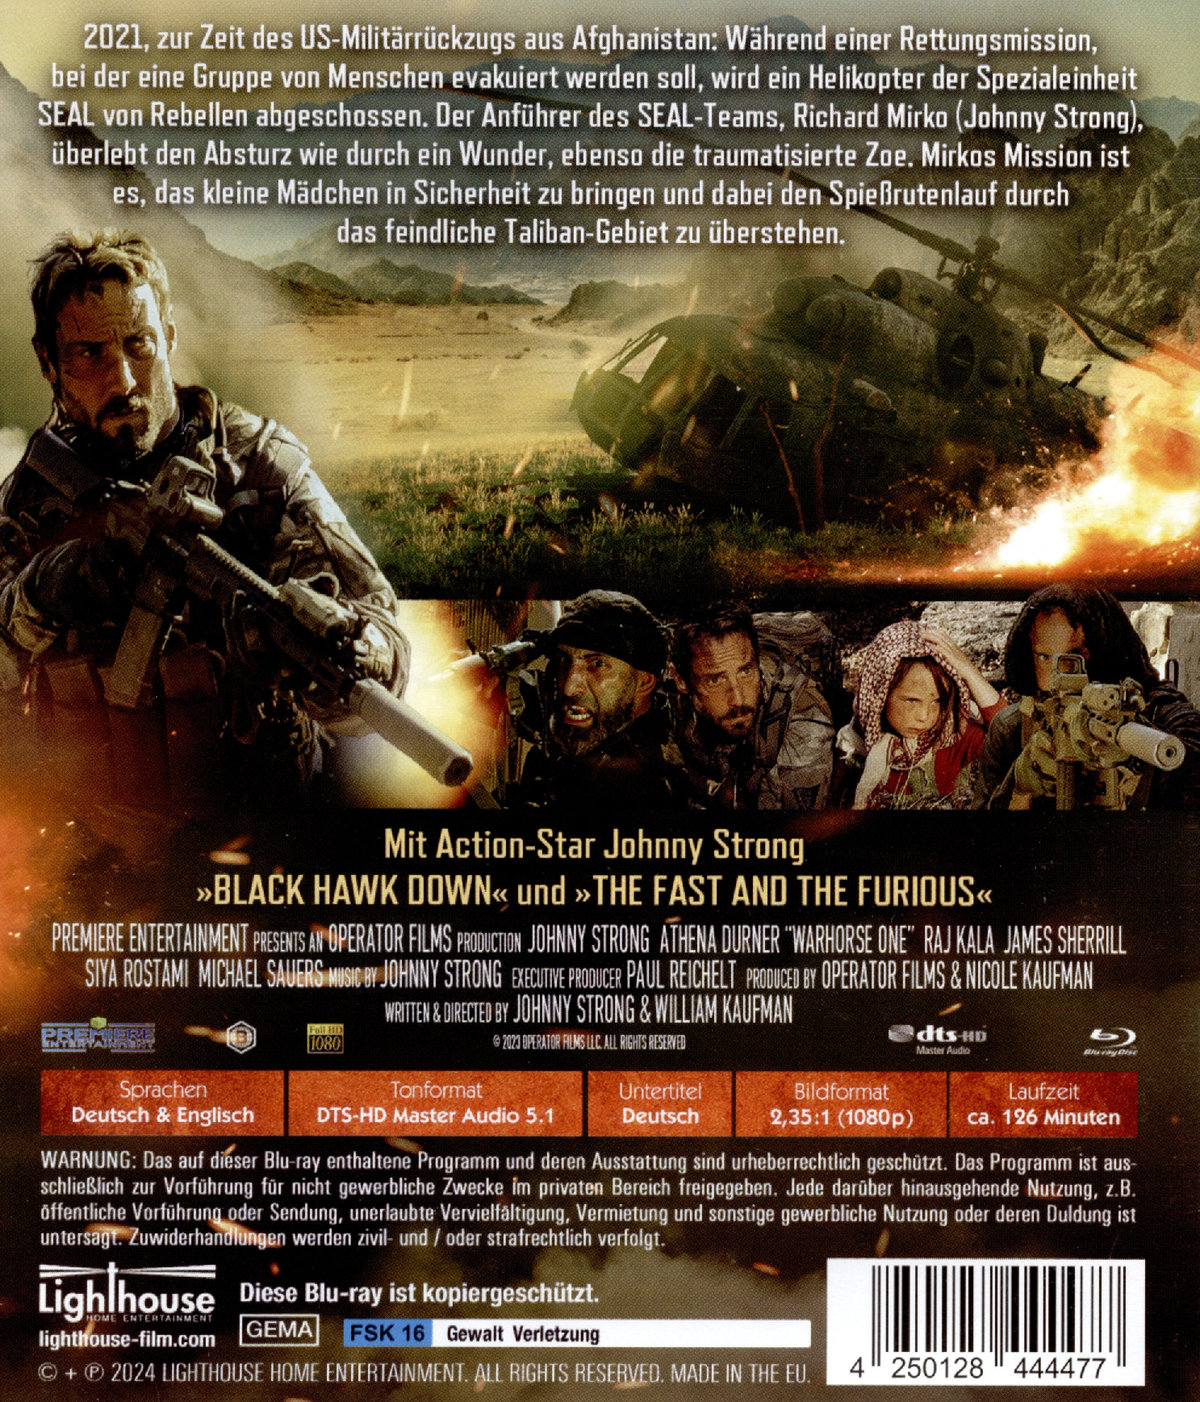 Warhorse - One Mission. One Moment. One Man  (Blu-ray Disc)